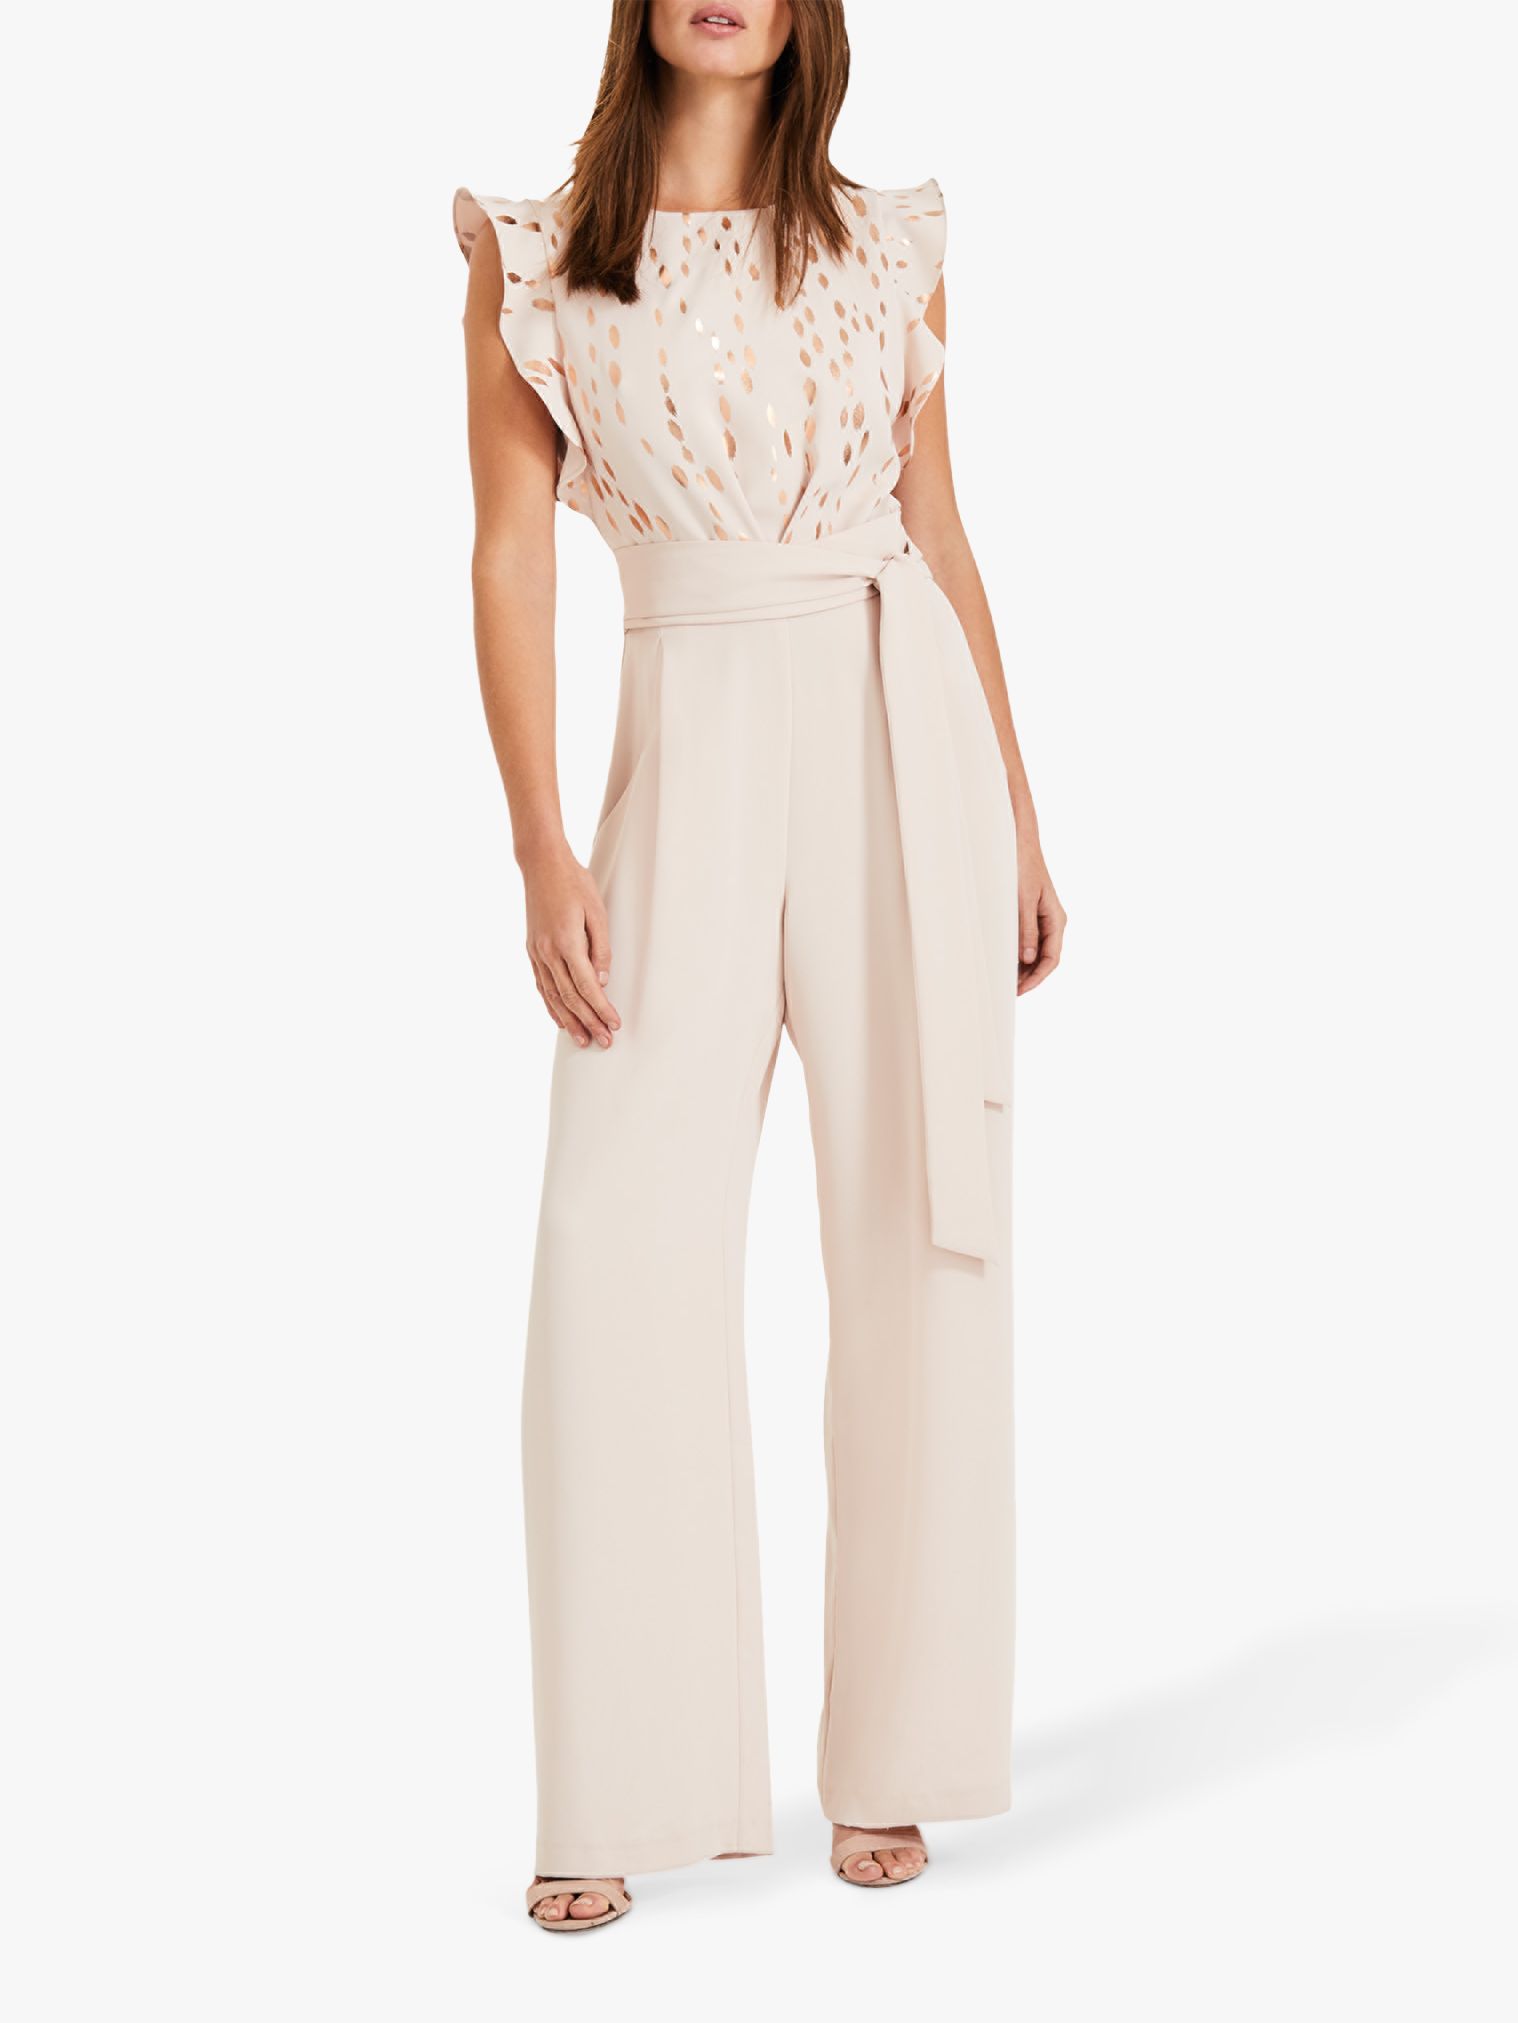 john lewis jumpsuits phase eight